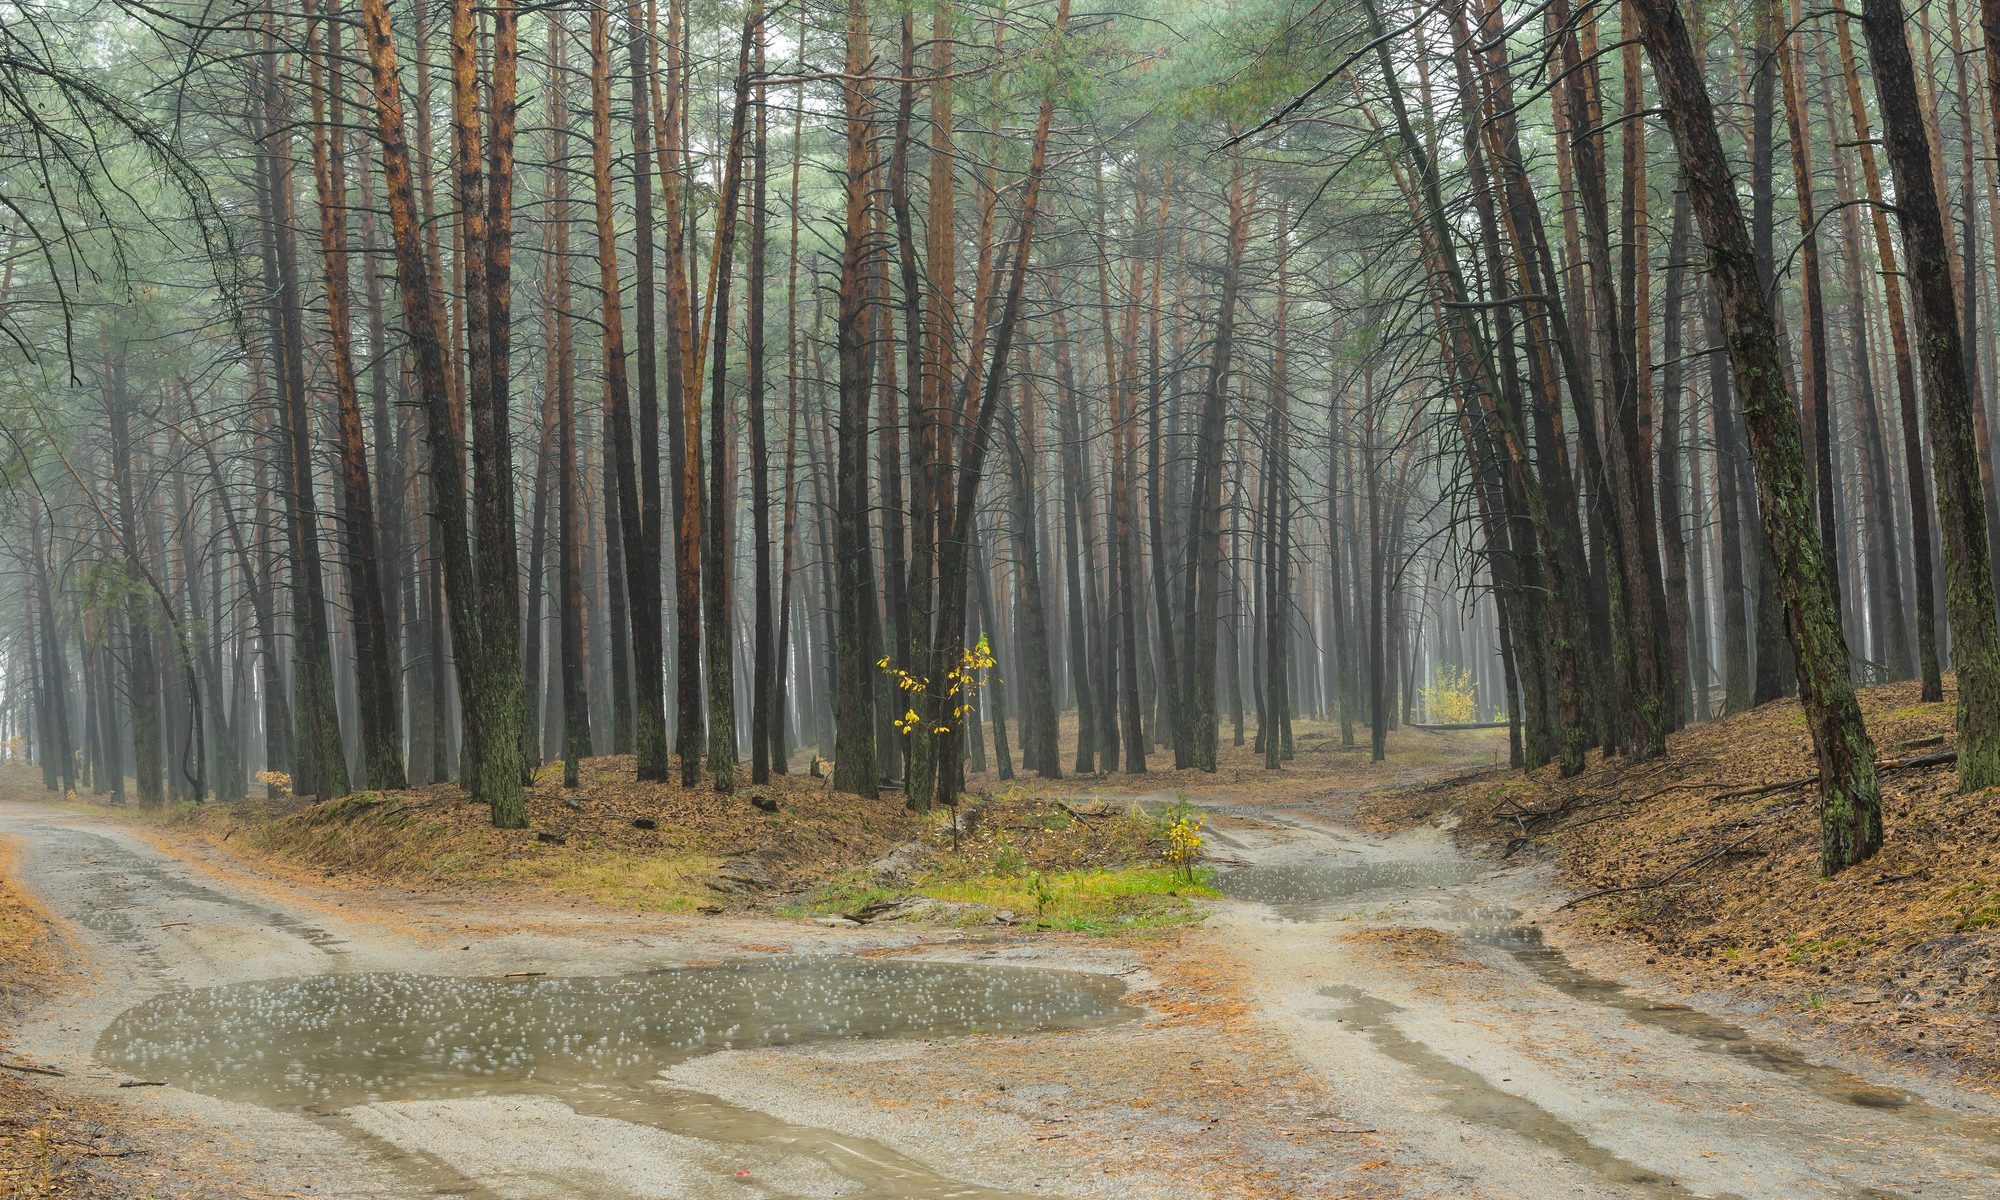 photograph of a forked path in pine forest